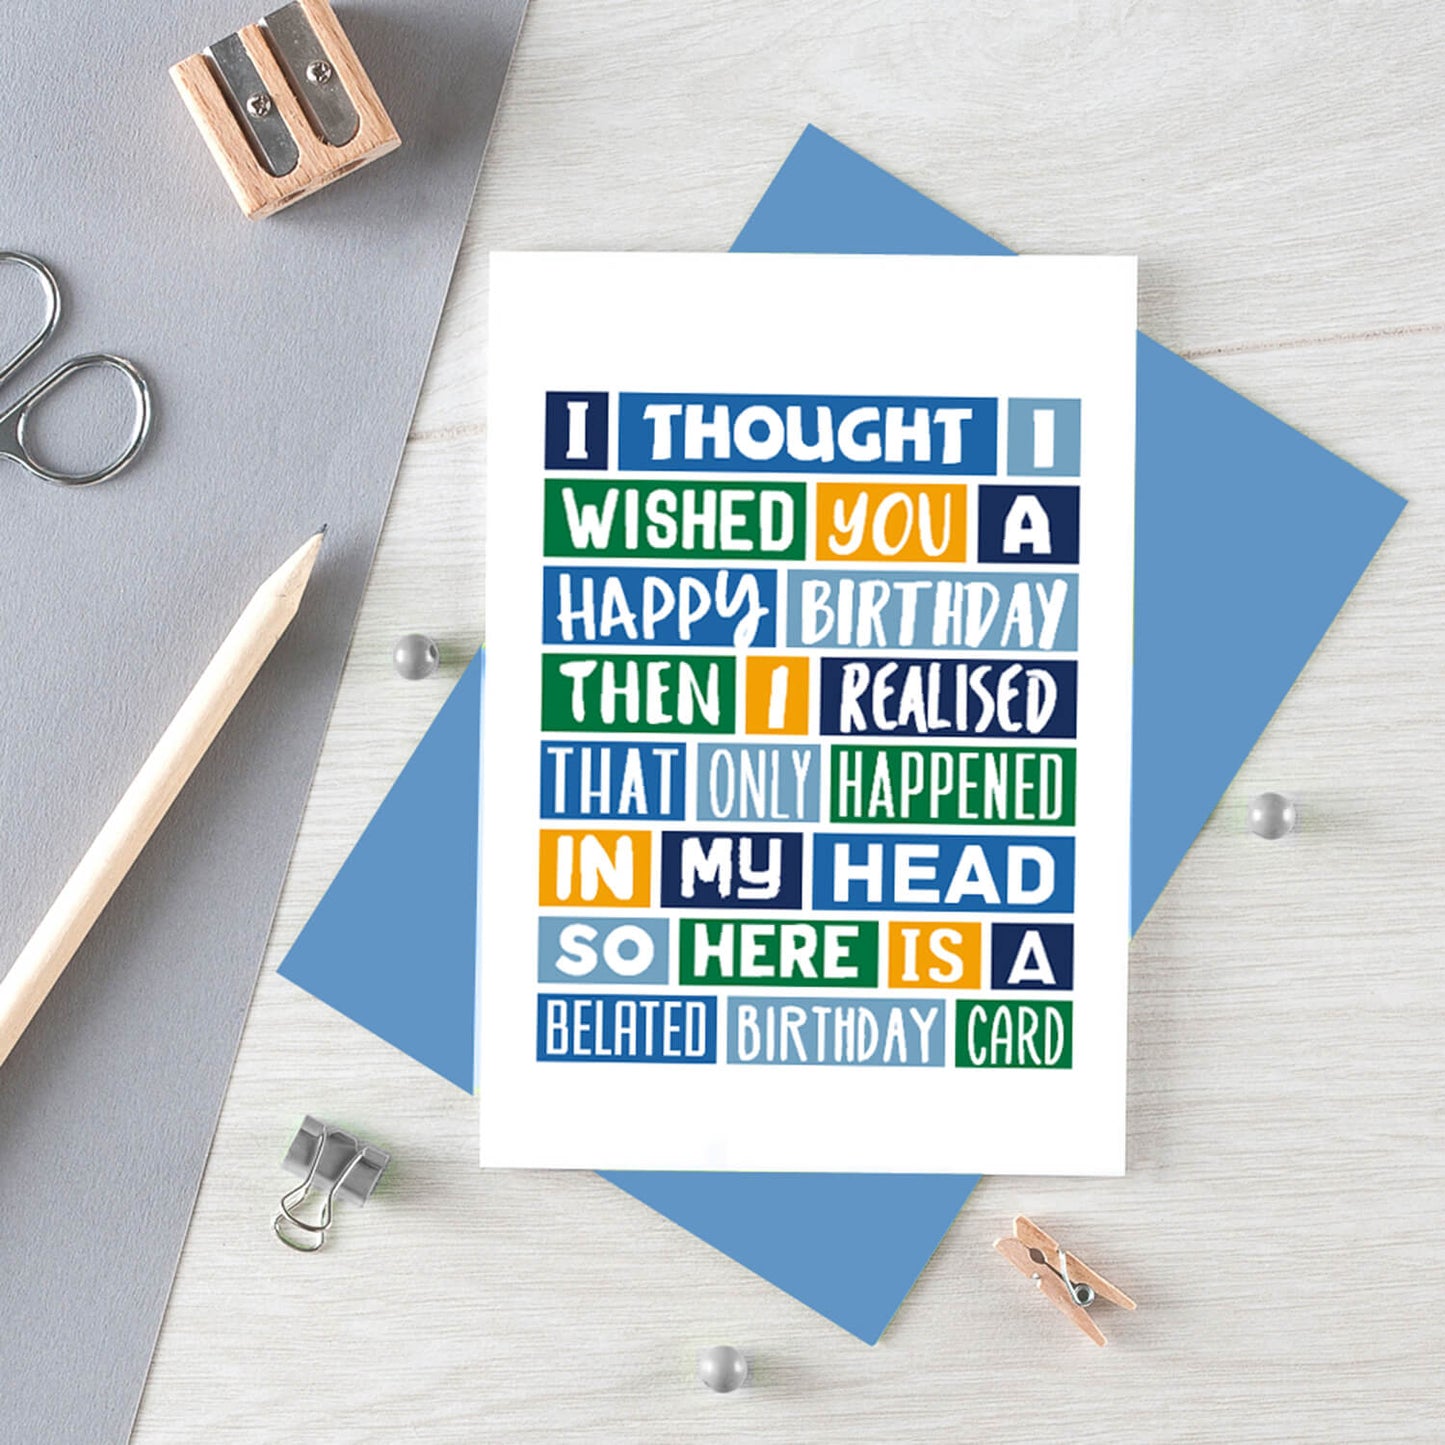 Belated Birthday Card by SixElevenCreations. Reads I thought I wished you a happy birthday then I realised that only happened in my head. So here is a belated birthday card. Product Code SE0093A6